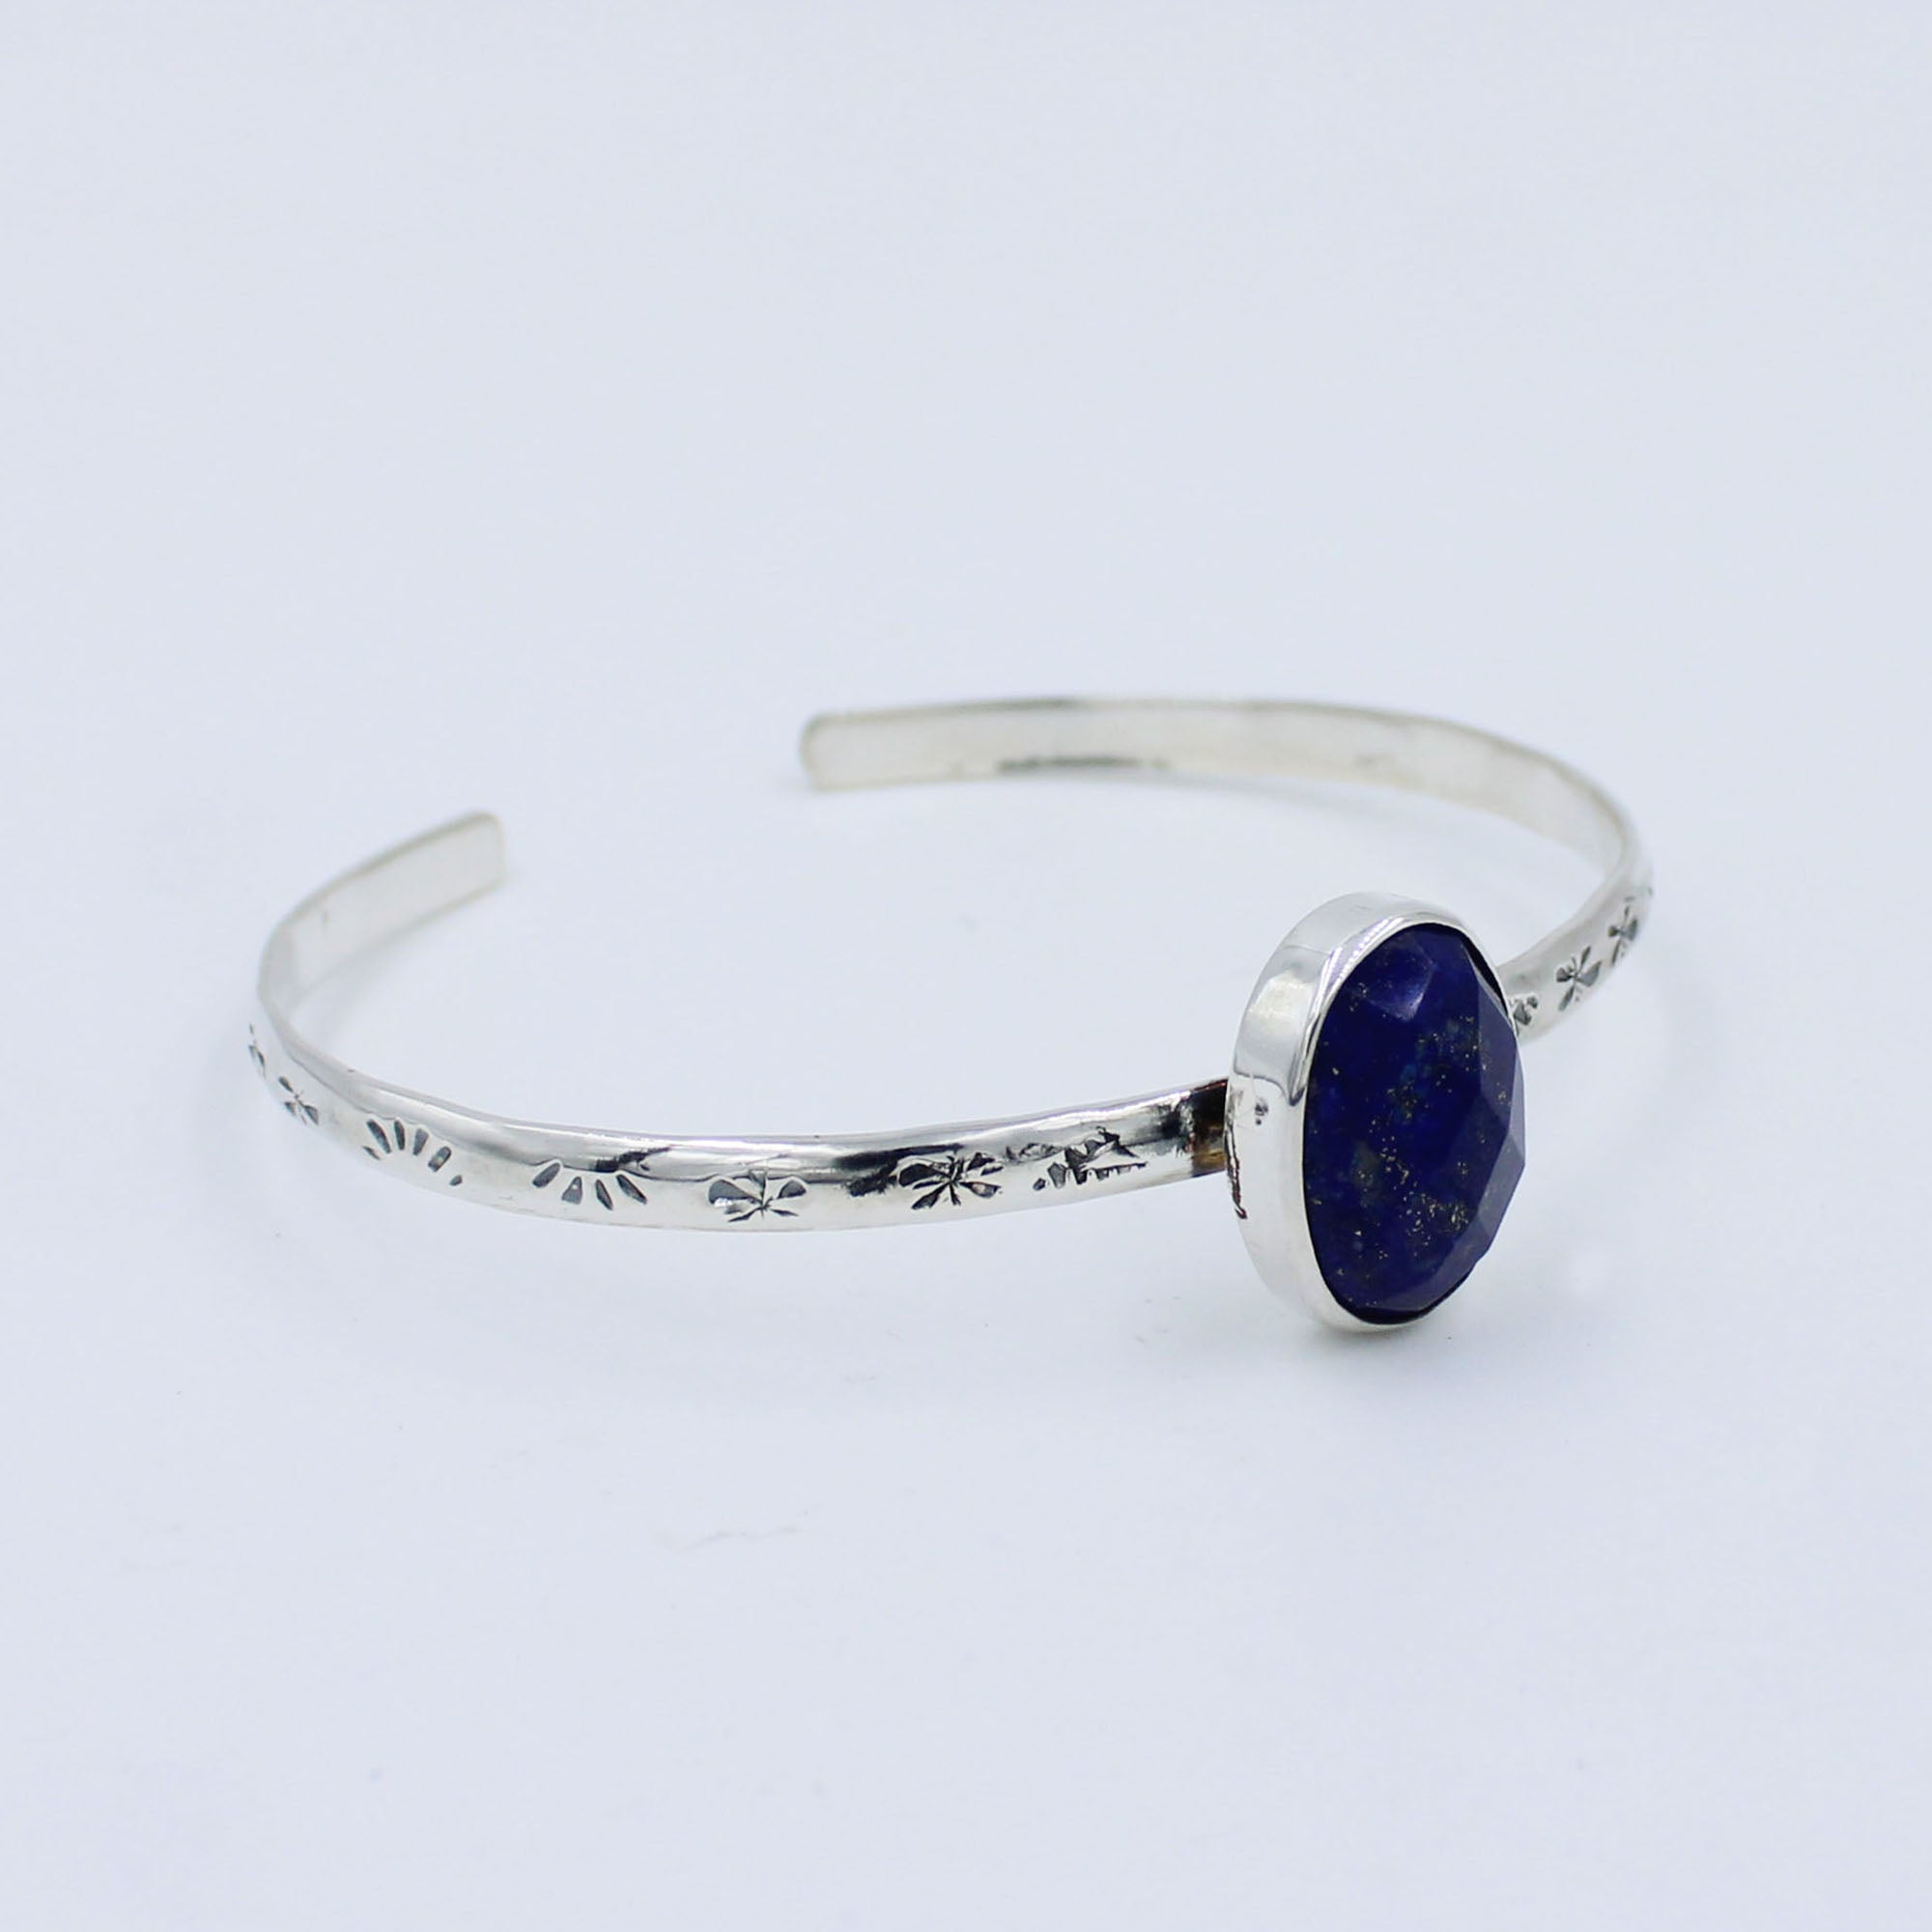 Faceted Lapis Lazuli 925 Sterling Silver Bangle